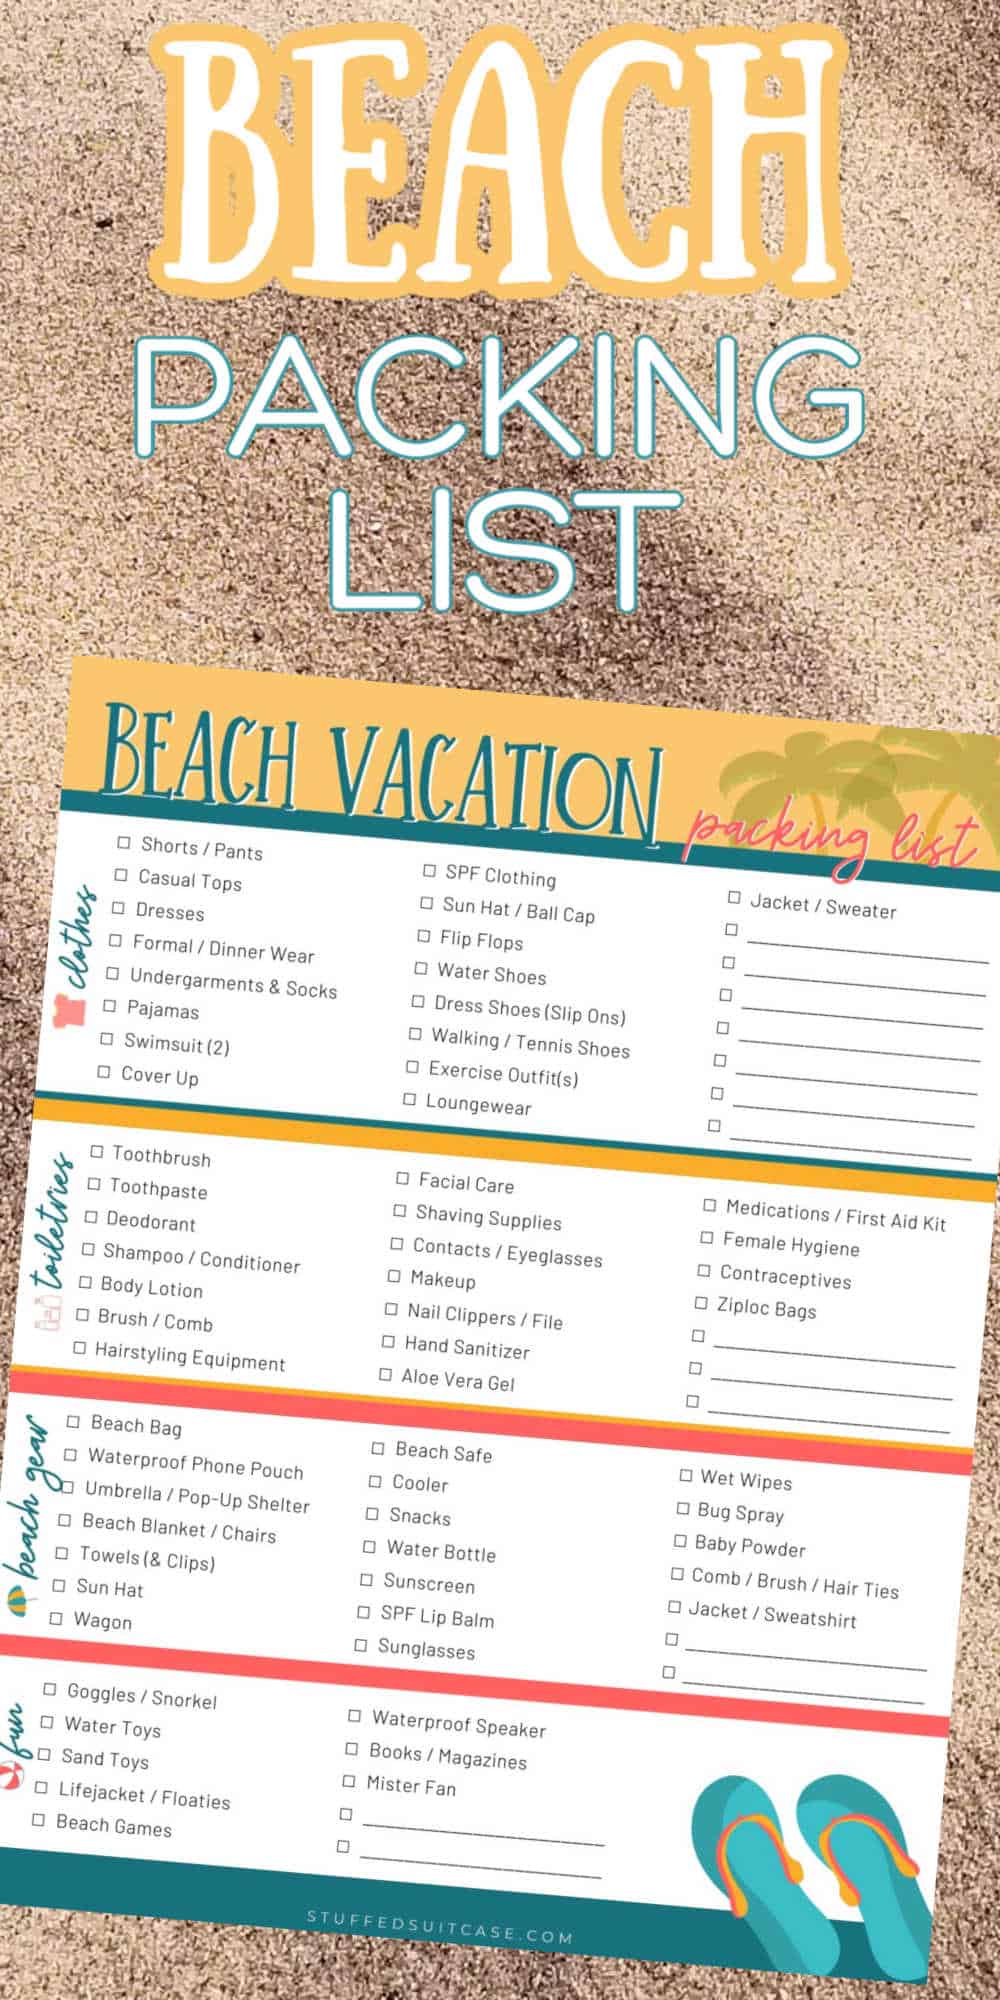 family-beach-vacation-packing-list-printable-zen-life-and-travel-10-free-packing-checklists